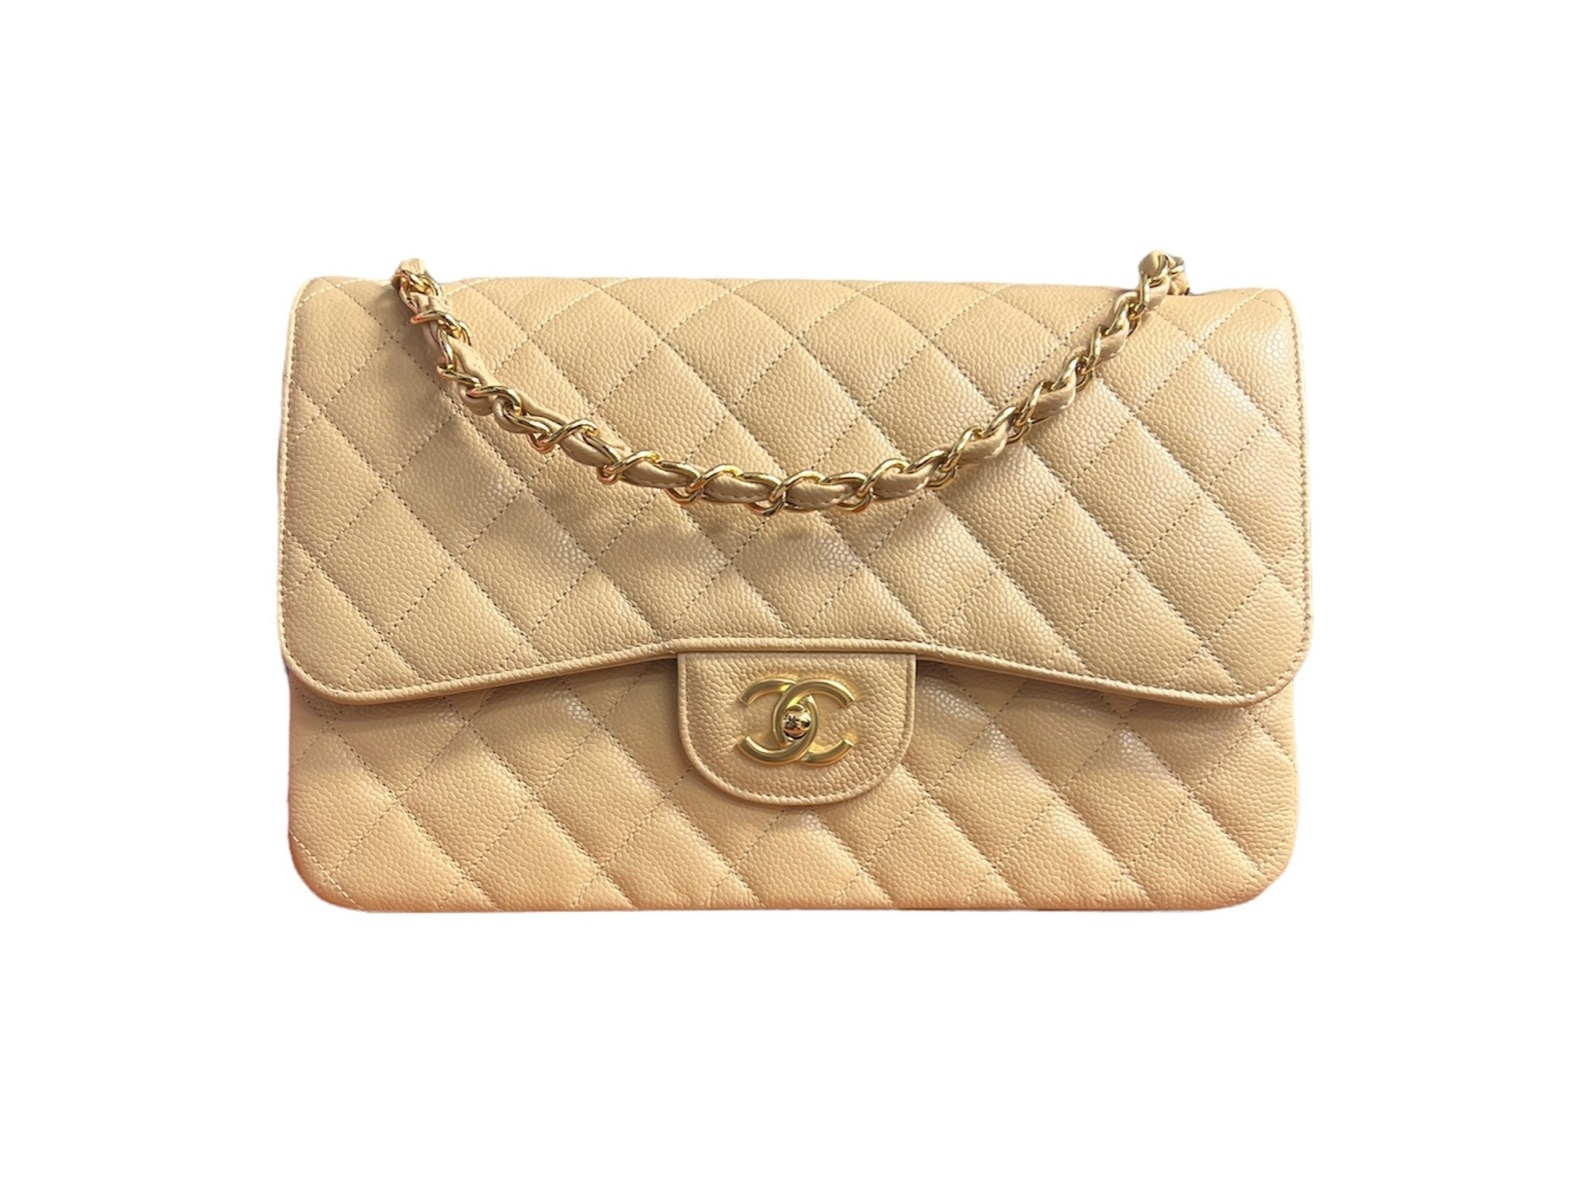 Chanel Beige Quilted Caviar New Classic Double Flap Jumbo Q6BAQP0FI4049